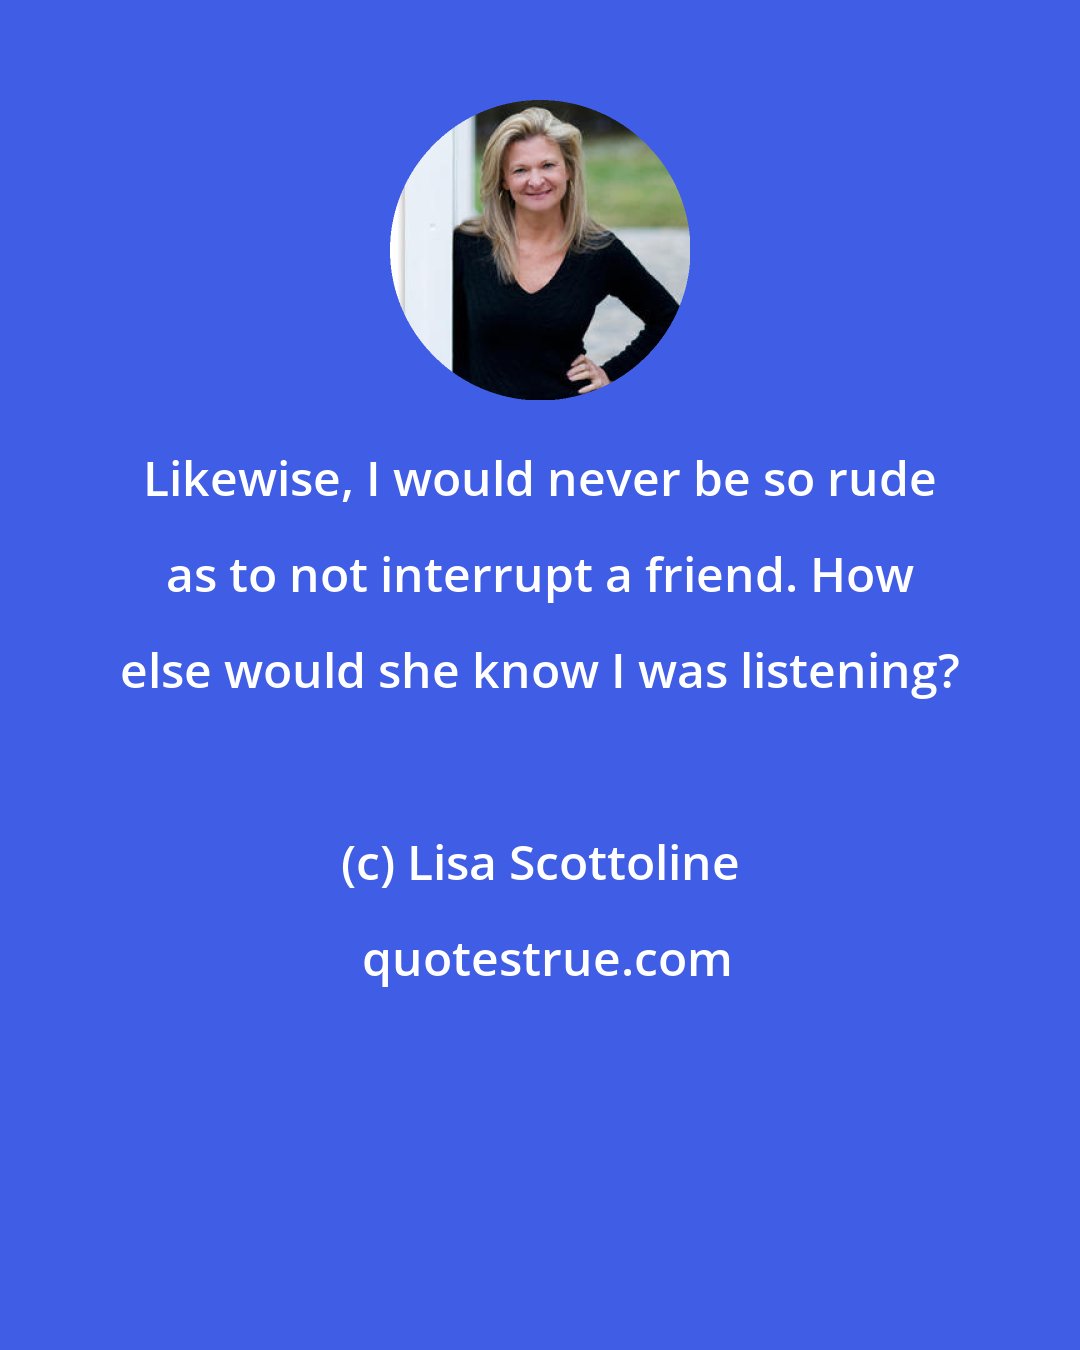 Lisa Scottoline: Likewise, I would never be so rude as to not interrupt a friend. How else would she know I was listening?